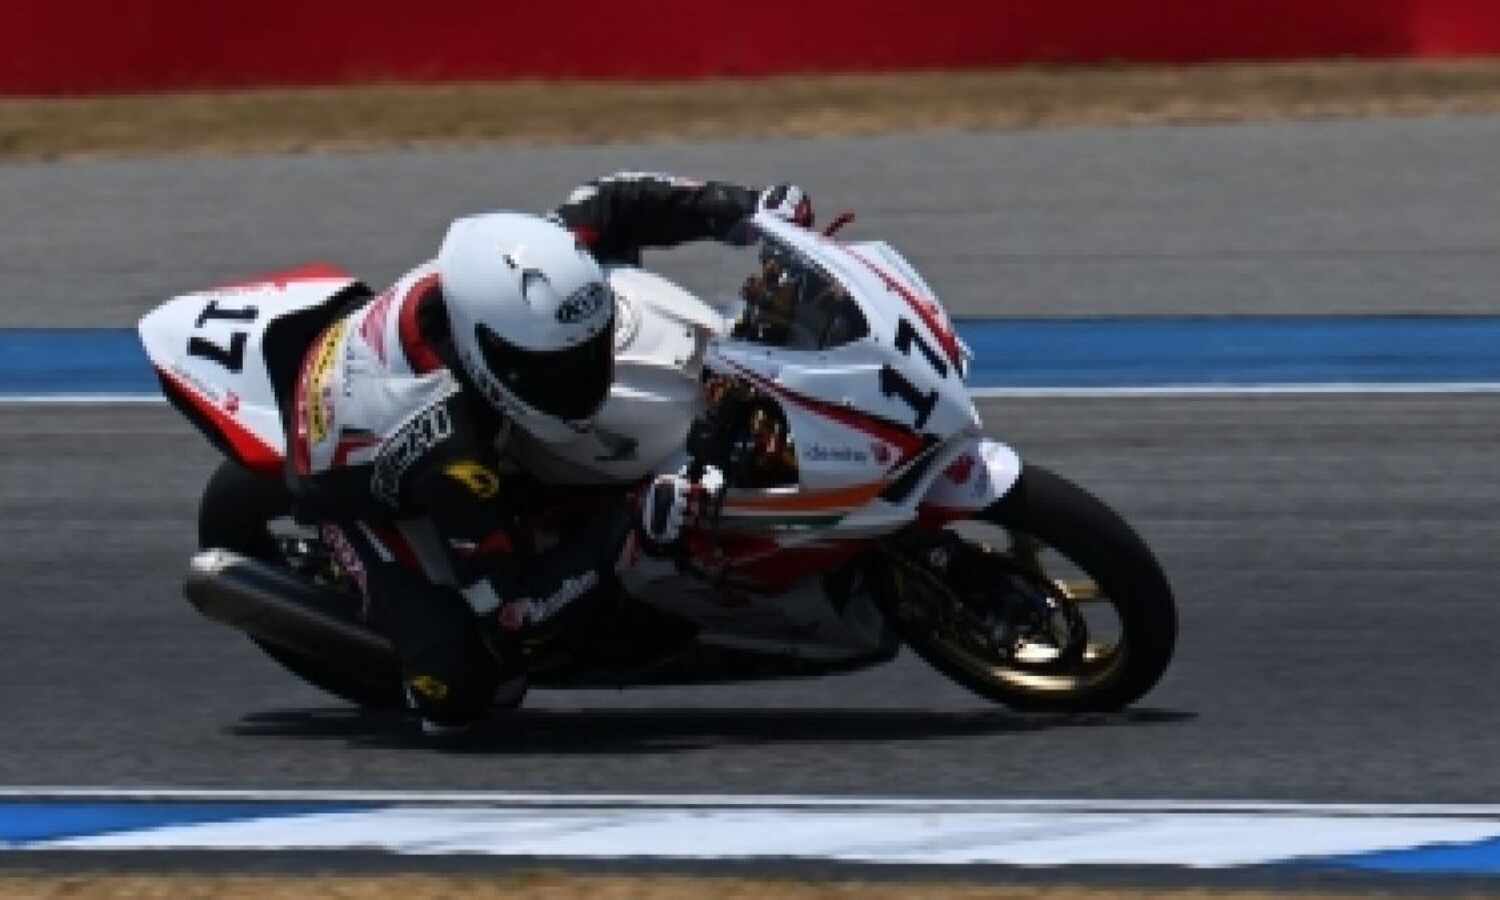 IDEMITSU Honda Racing India’s riders gain more points in second race